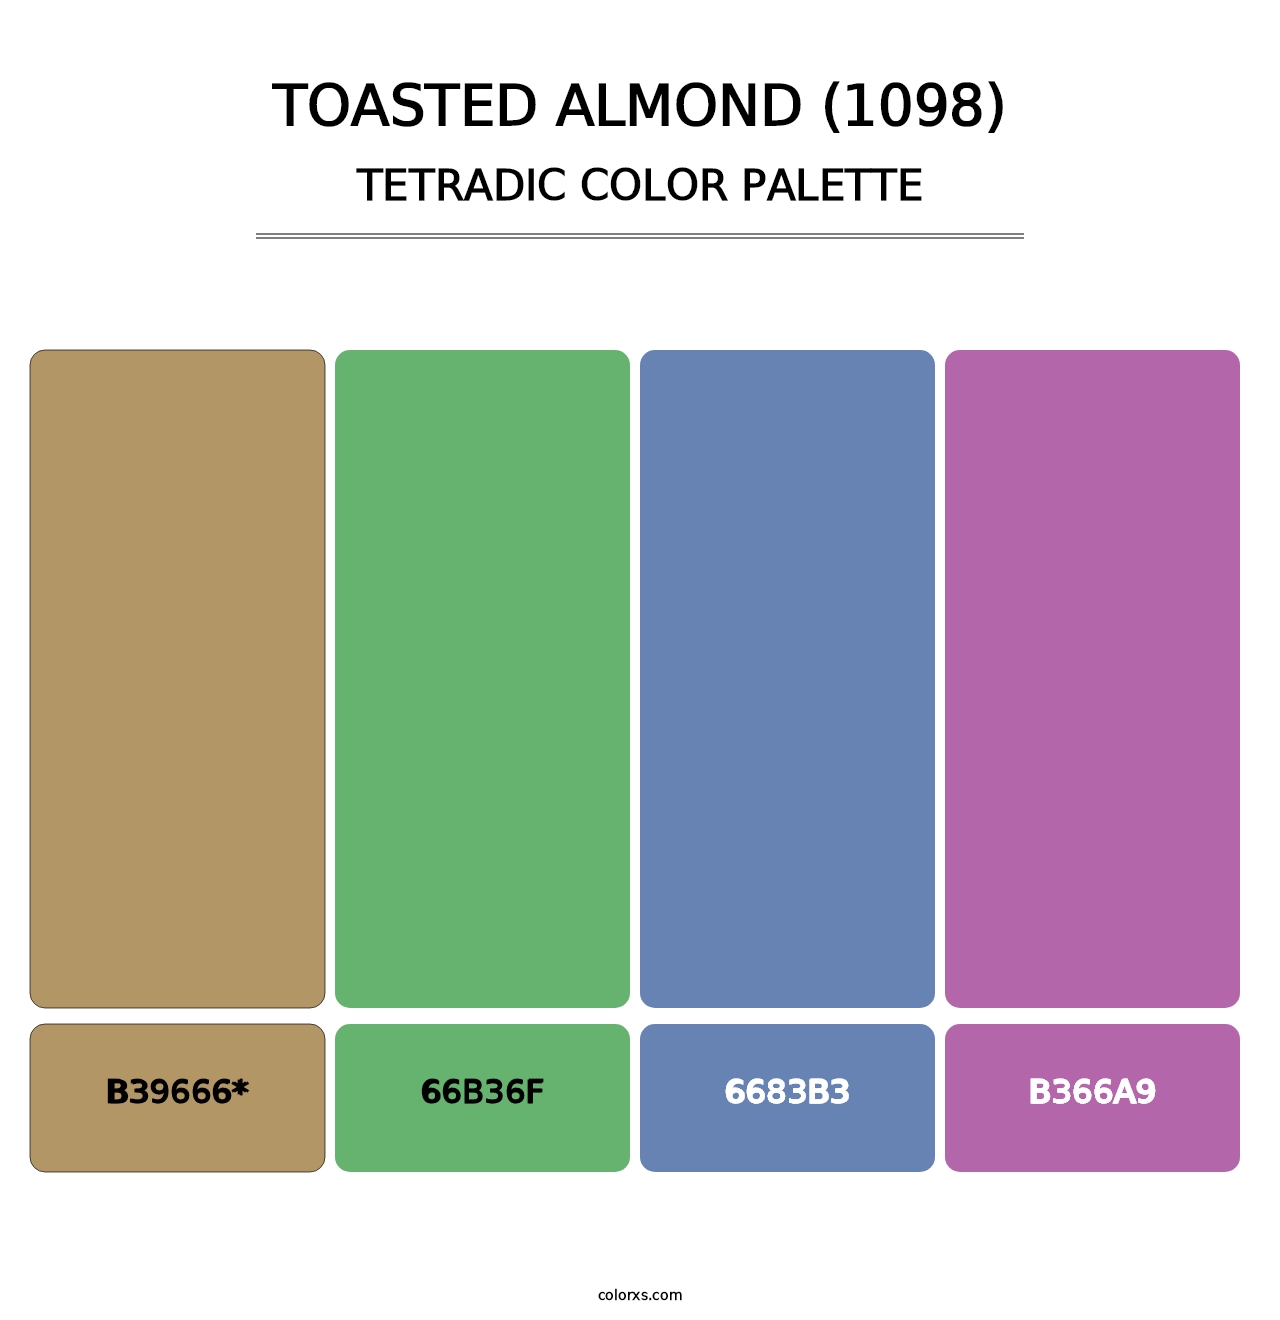 Toasted Almond (1098) - Tetradic Color Palette